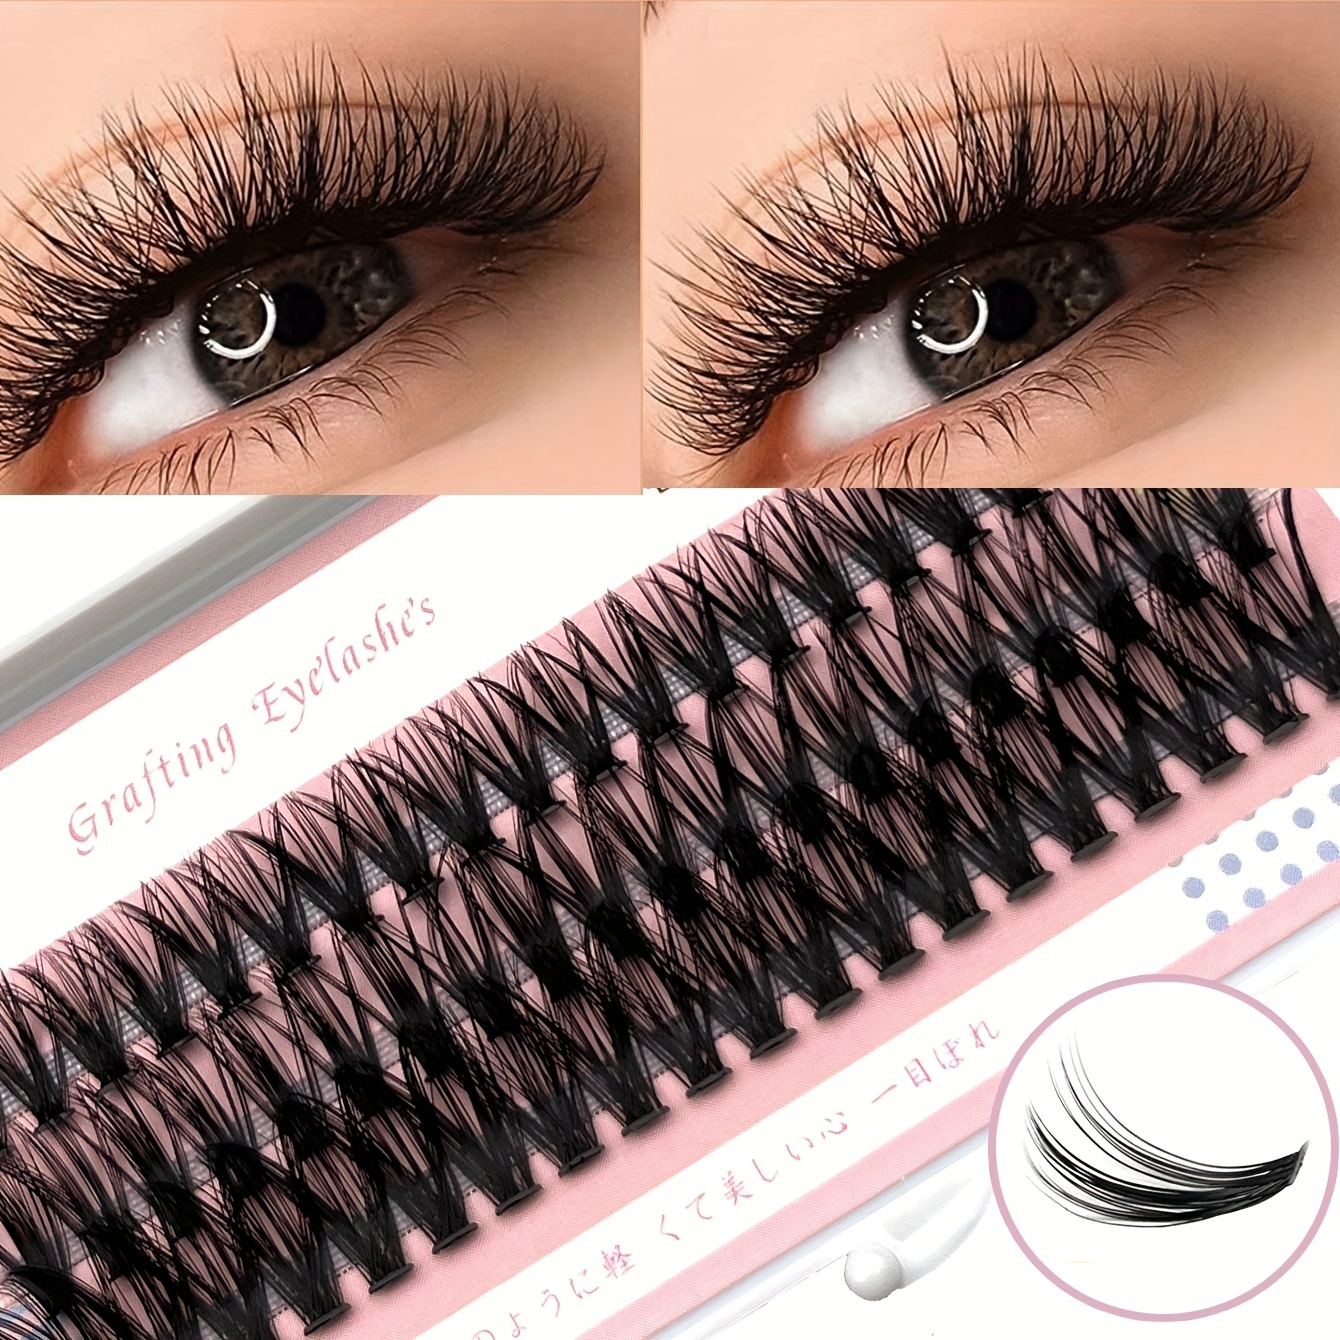 

60 Cluster, 40d C Curl 10/12/14/16mm Cluster Lashes Individual Lash Extensions, Soft Natural Look False Eyelashes Diy At Home